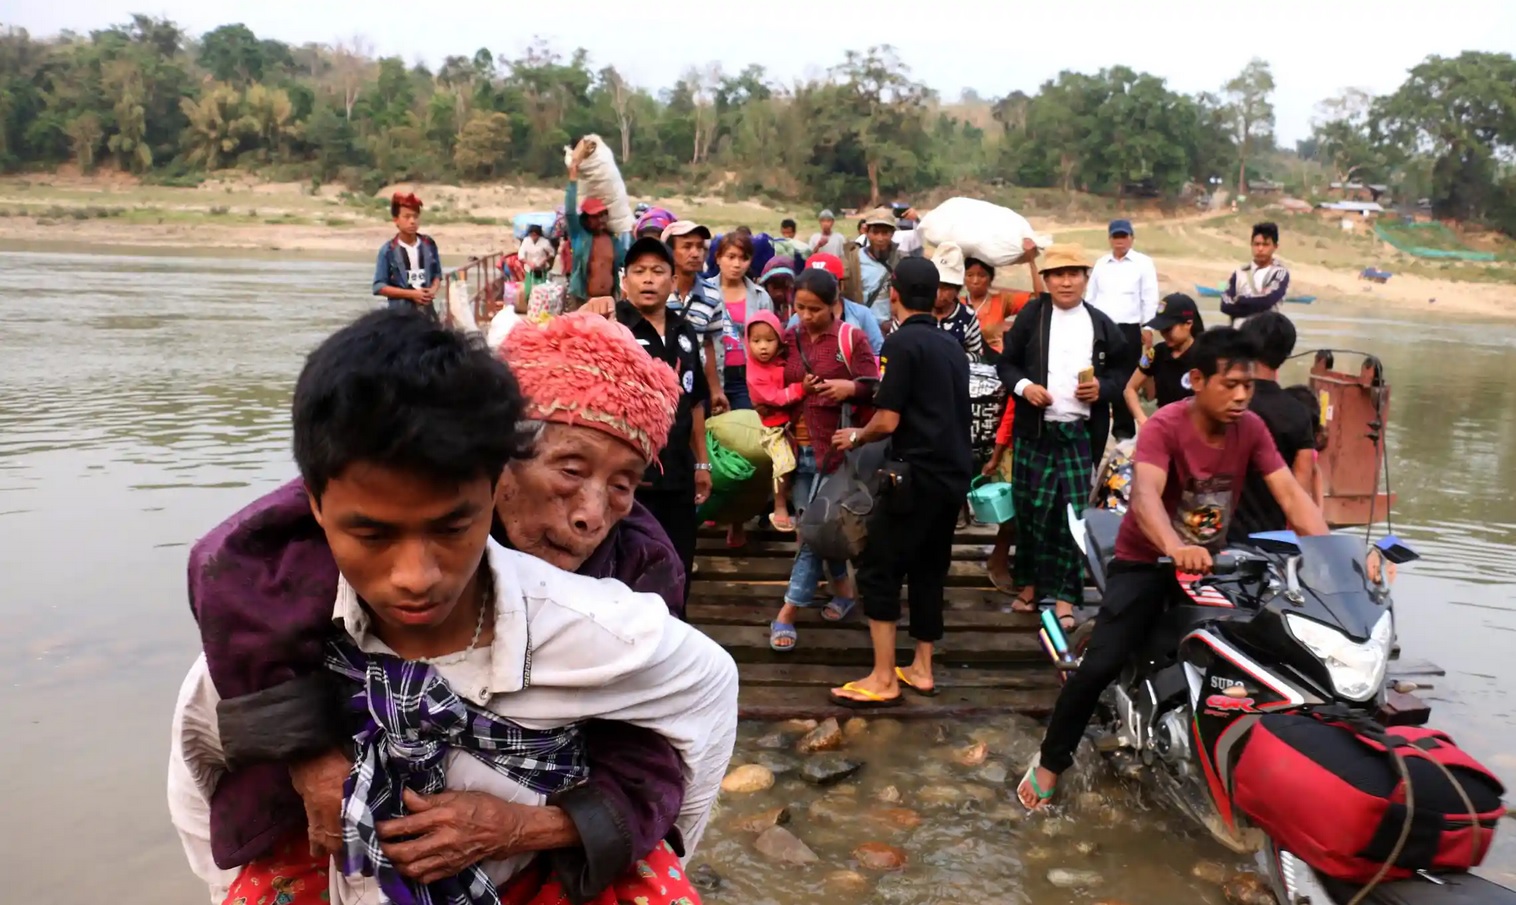 Some Kachin people (different from Chins) fleeing to safety. Img from The Guardian.